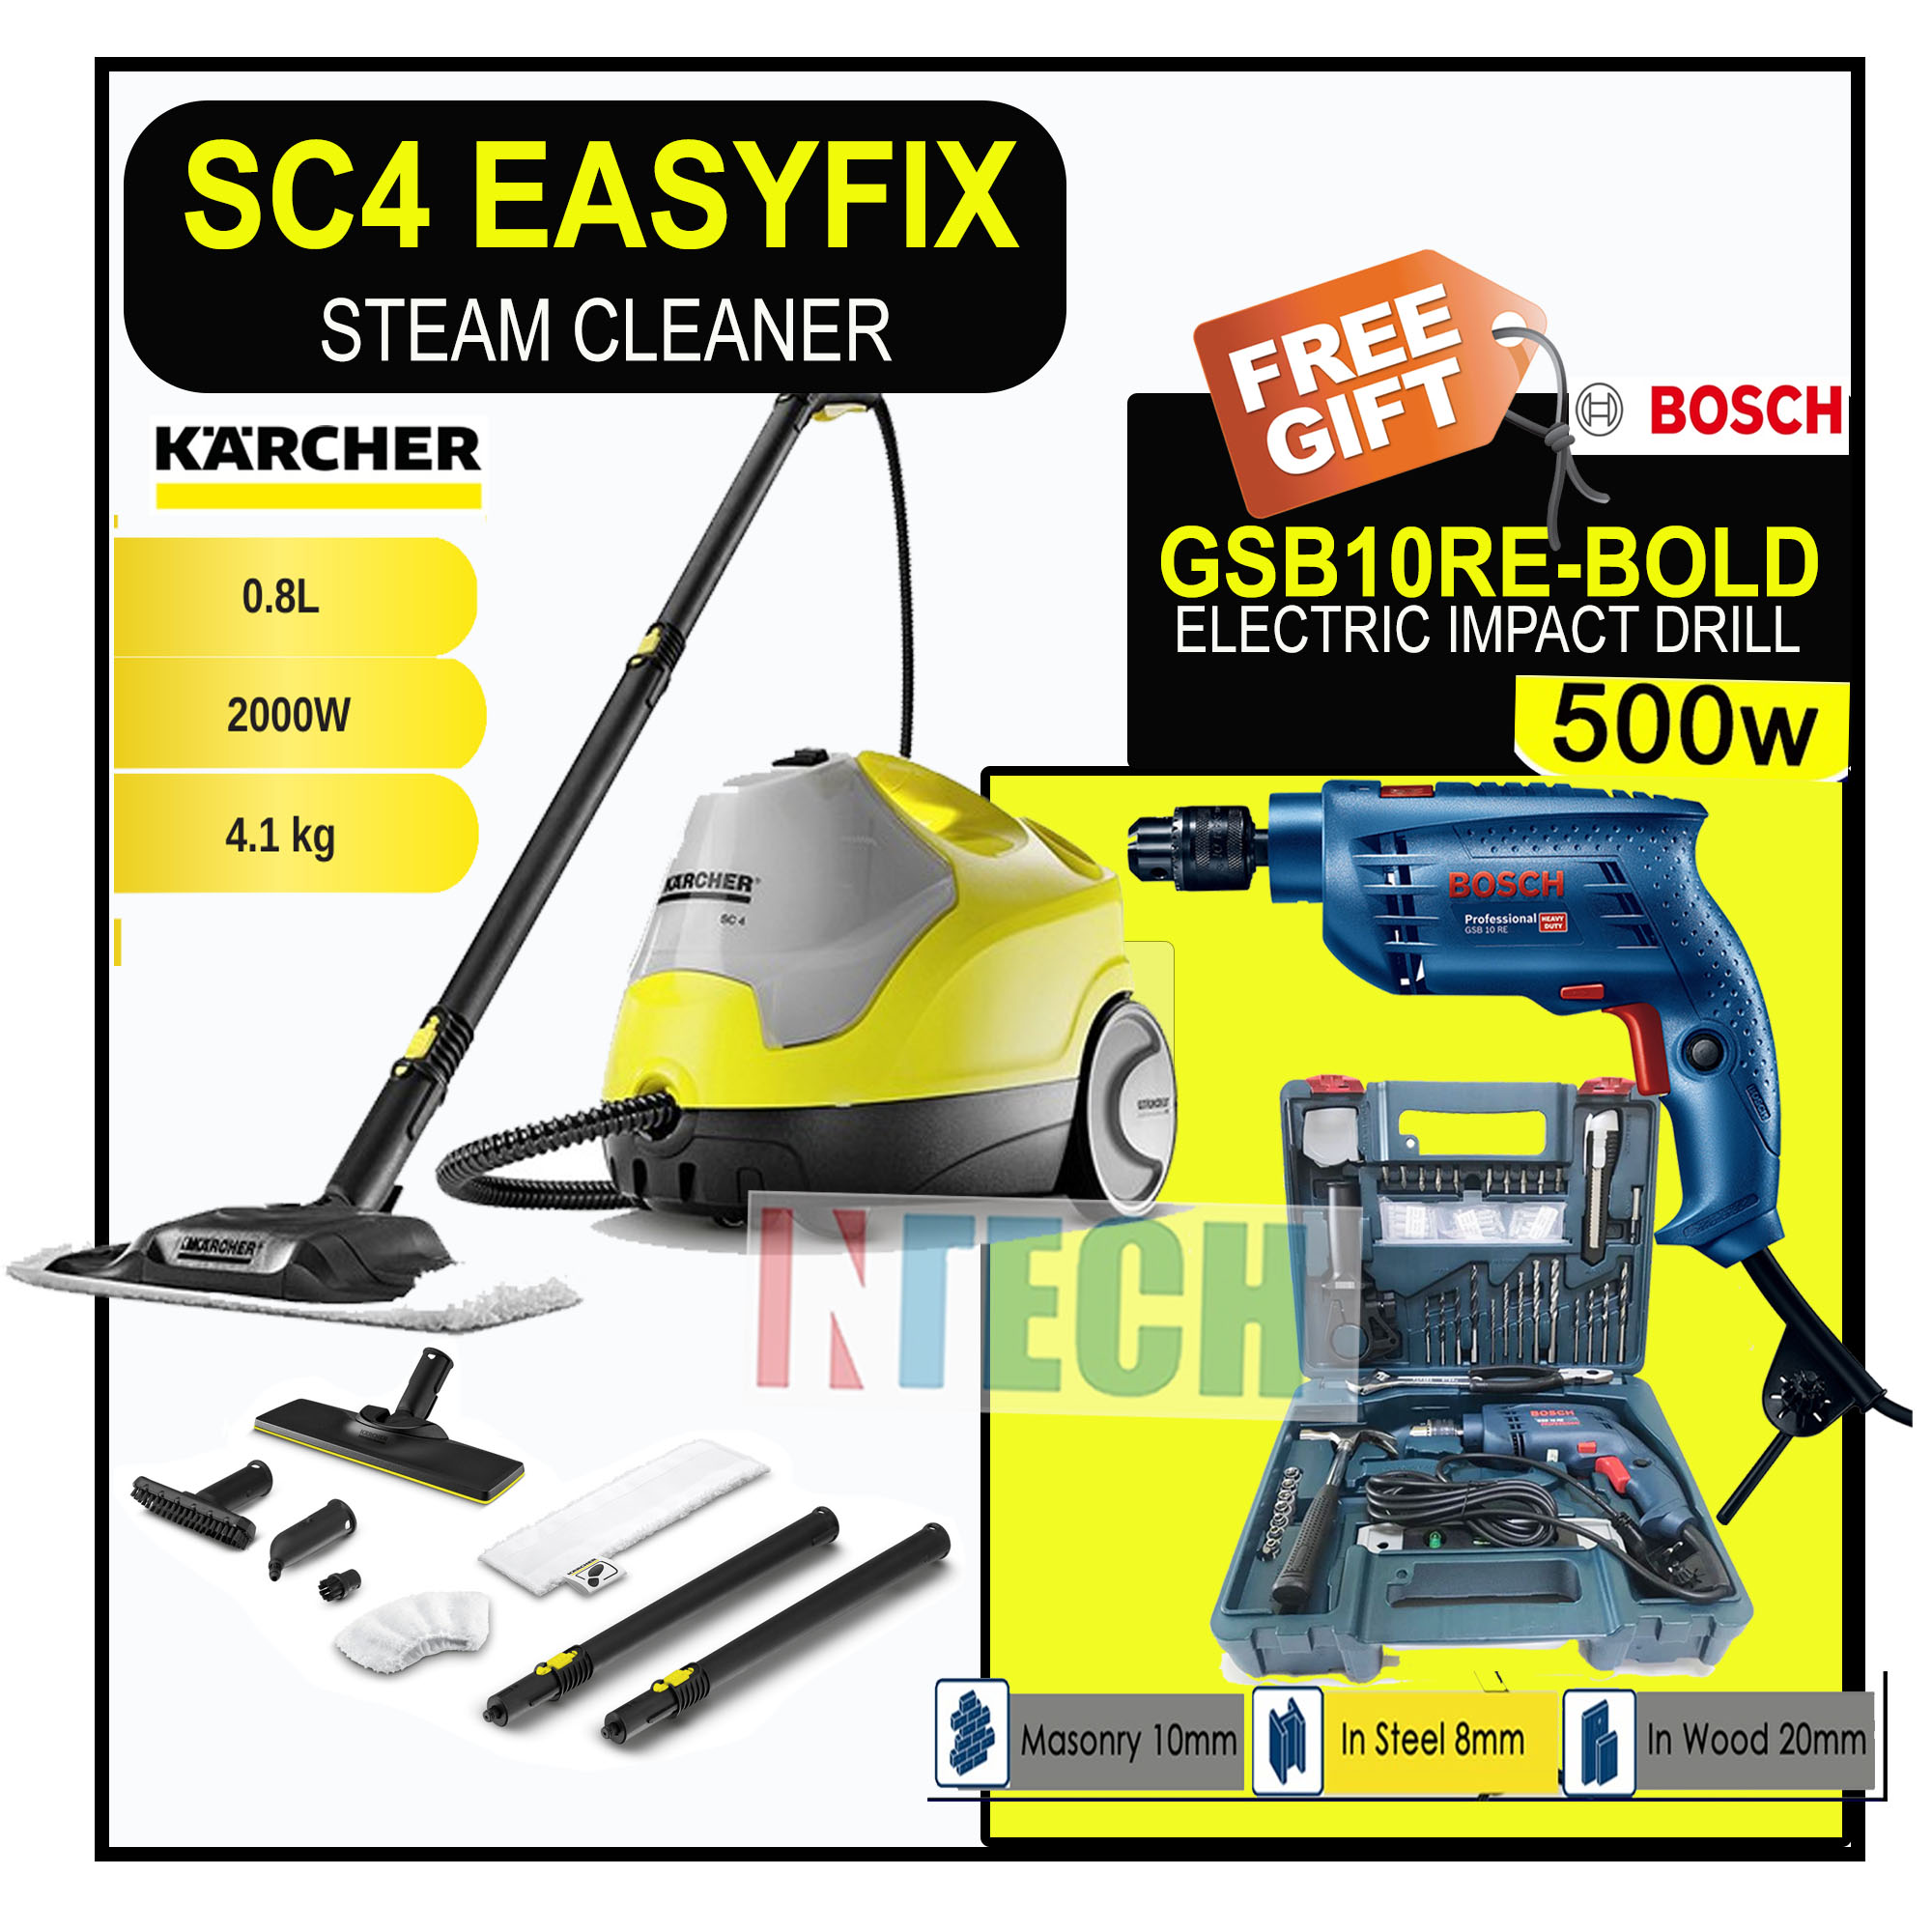 KARCHER SC4 Easy fix steam cleaner - Sold in working con…